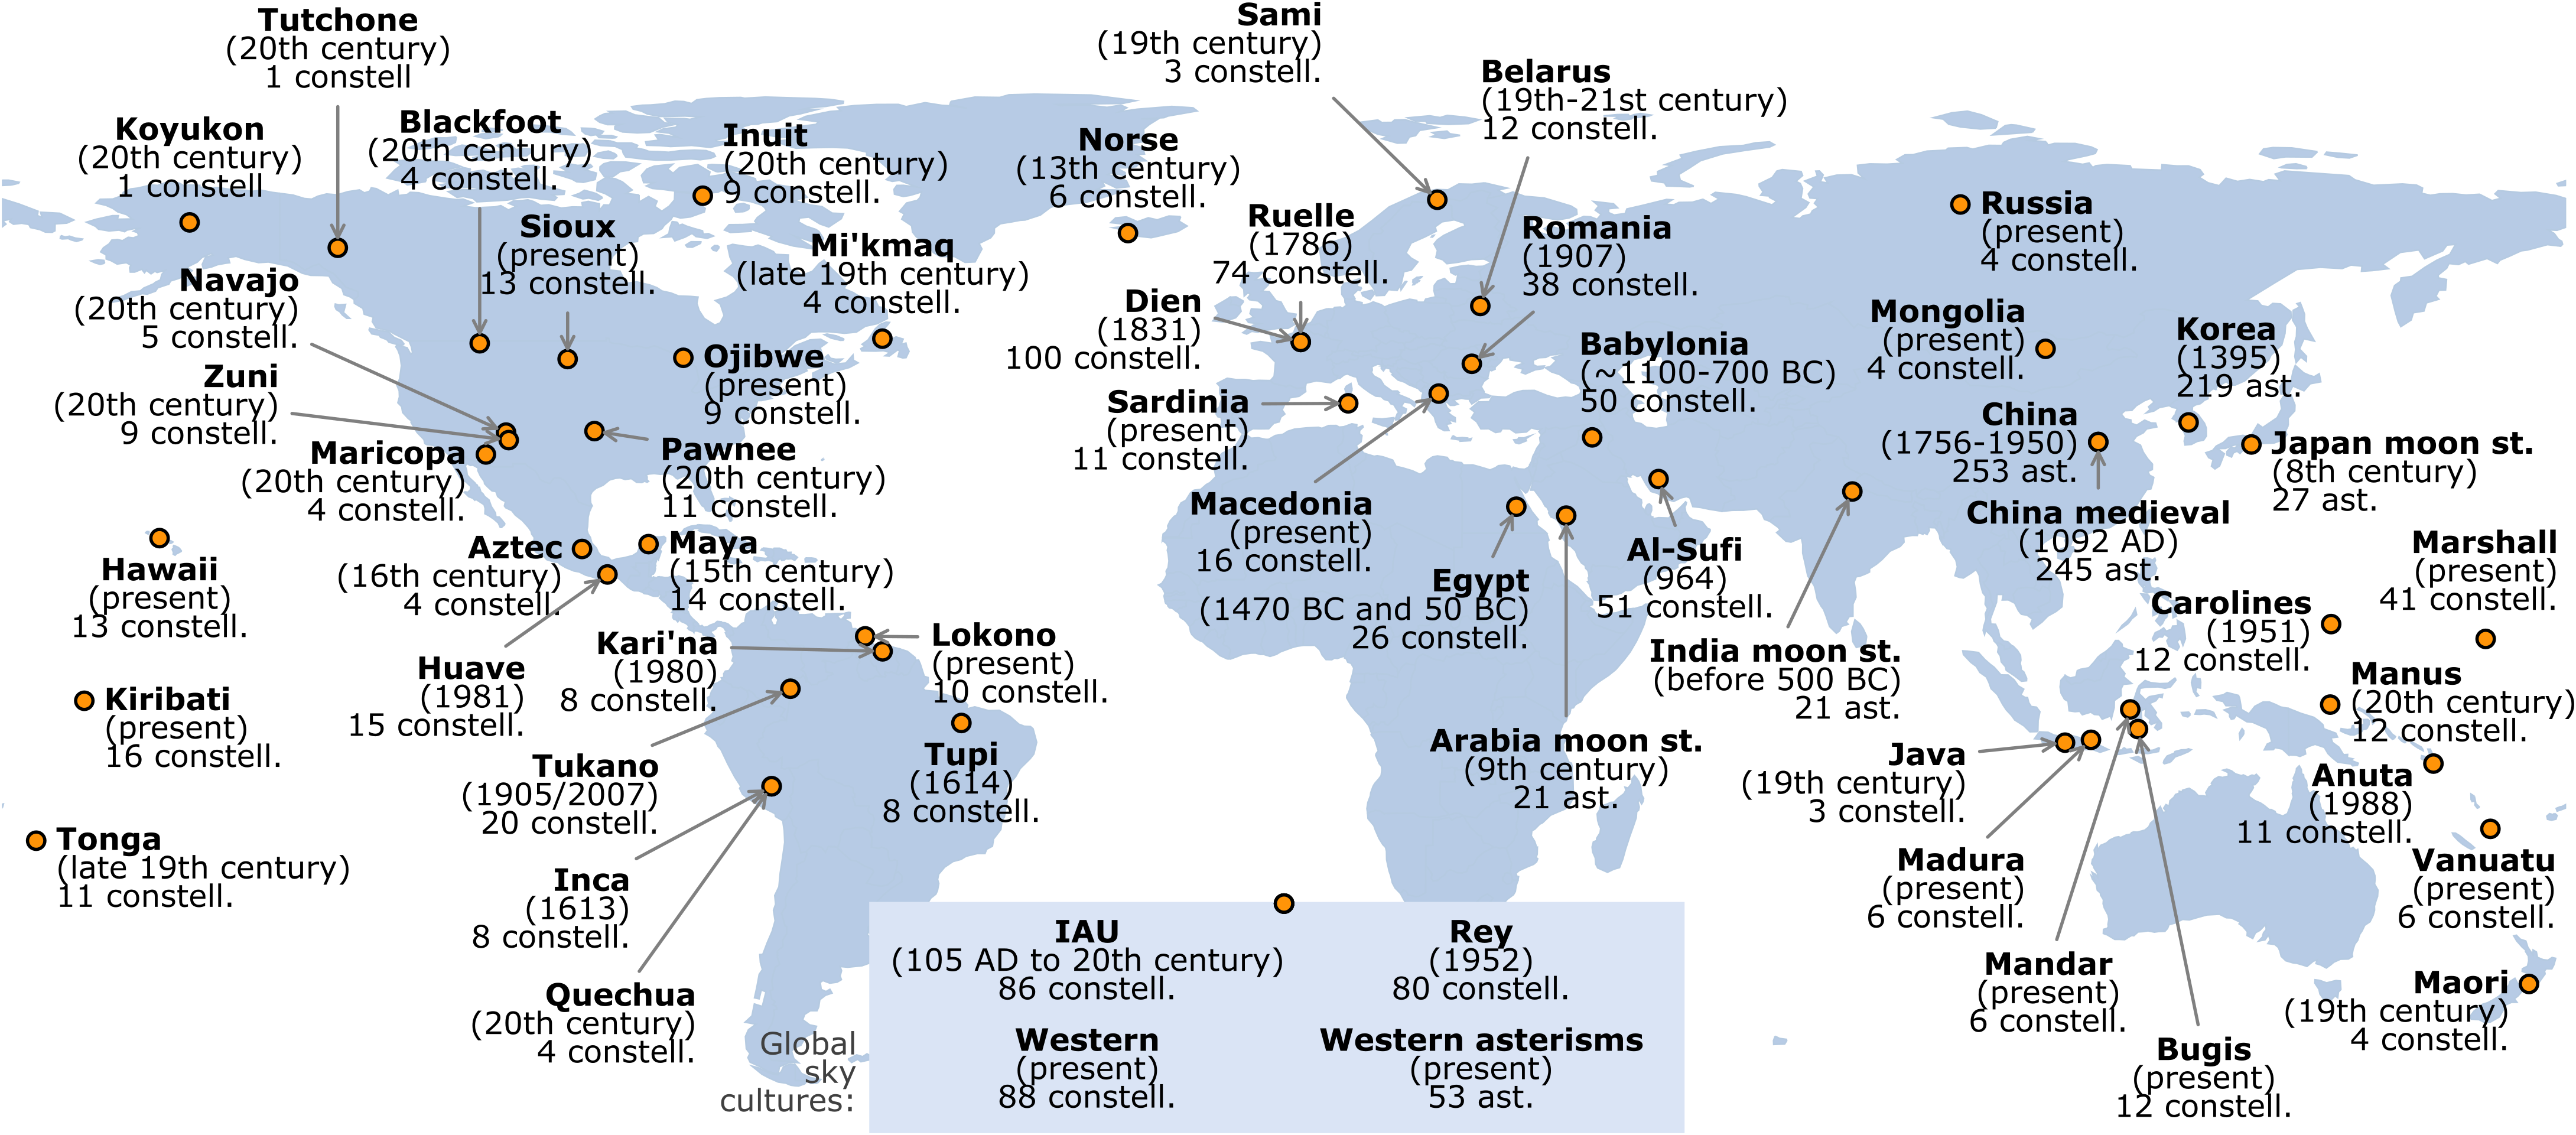 Map of the world with astronomical cultures marked